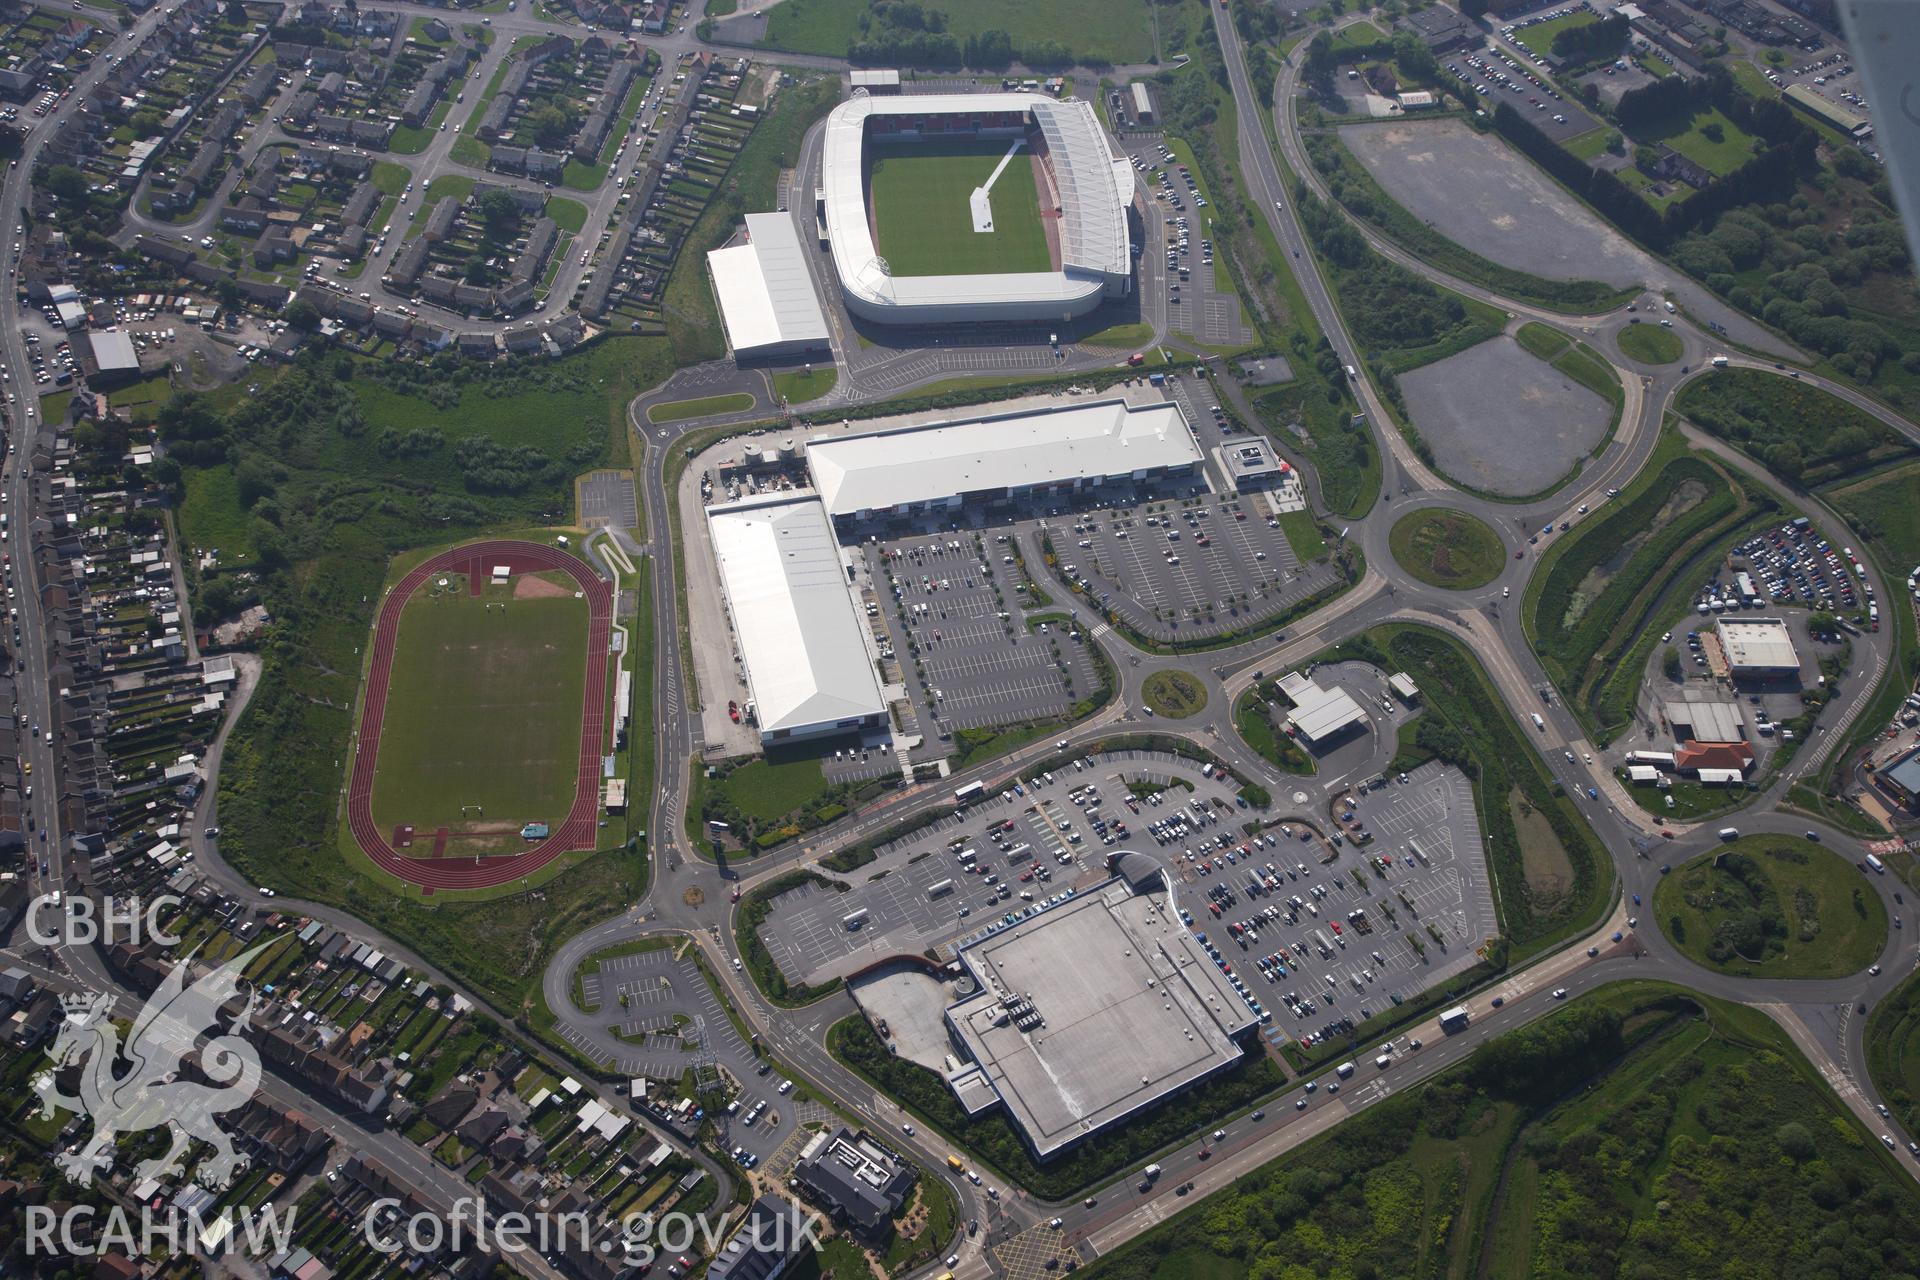 RCAHMW colour oblique photograph of General view of Parc y Scarlets, looking south east. Taken by Toby Driver on 24/05/2012.